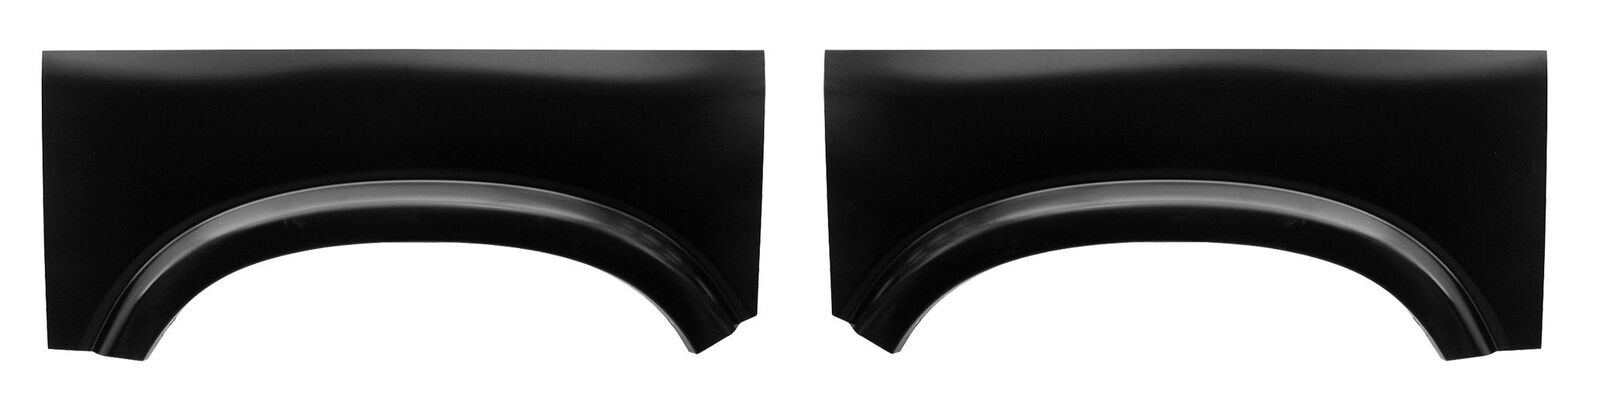 Rear Wheel Arch Bed Panels fits 94-04 Chevy GMC S10 S15 Pickup/ 2 DR Blazer PAIR